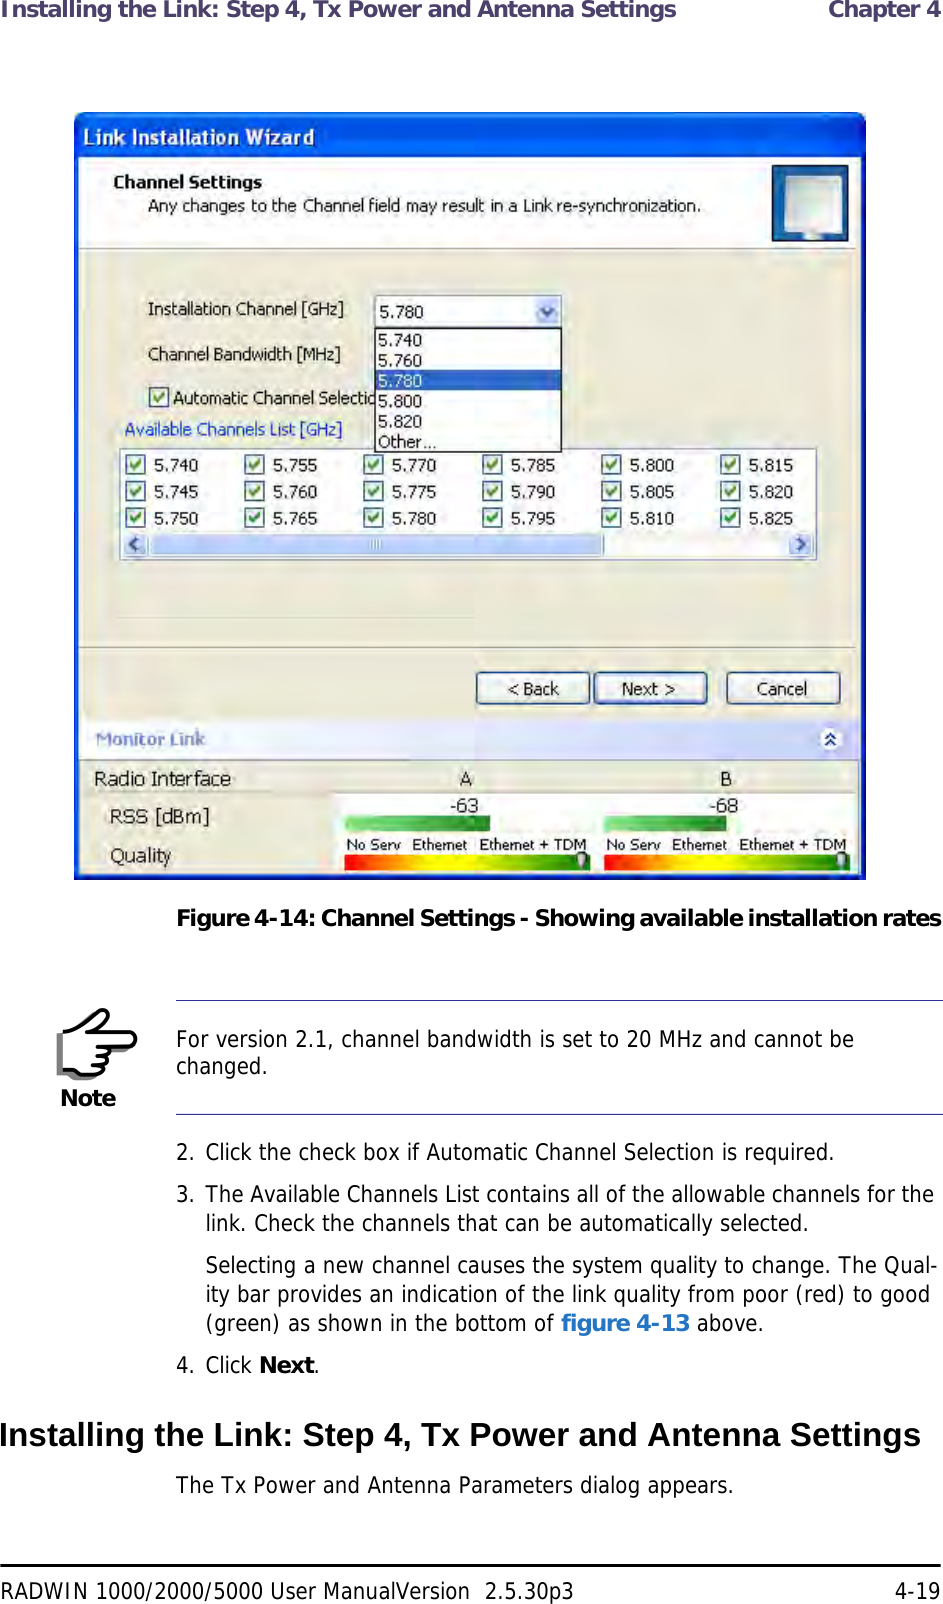 Installing the Link: Step 4, Tx Power and Antenna Settings  Chapter 4RADWIN 1000/2000/5000 User ManualVersion  2.5.30p3 4-19Figure 4-14: Channel Settings - Showing available installation rates2. Click the check box if Automatic Channel Selection is required.3. The Available Channels List contains all of the allowable channels for the link. Check the channels that can be automatically selected.Selecting a new channel causes the system quality to change. The Qual-ity bar provides an indication of the link quality from poor (red) to good (green) as shown in the bottom of figure 4-13 above.4. Click Next.Installing the Link: Step 4, Tx Power and Antenna SettingsThe Tx Power and Antenna Parameters dialog appears.NoteFor version 2.1, channel bandwidth is set to 20 MHz and cannot be changed.